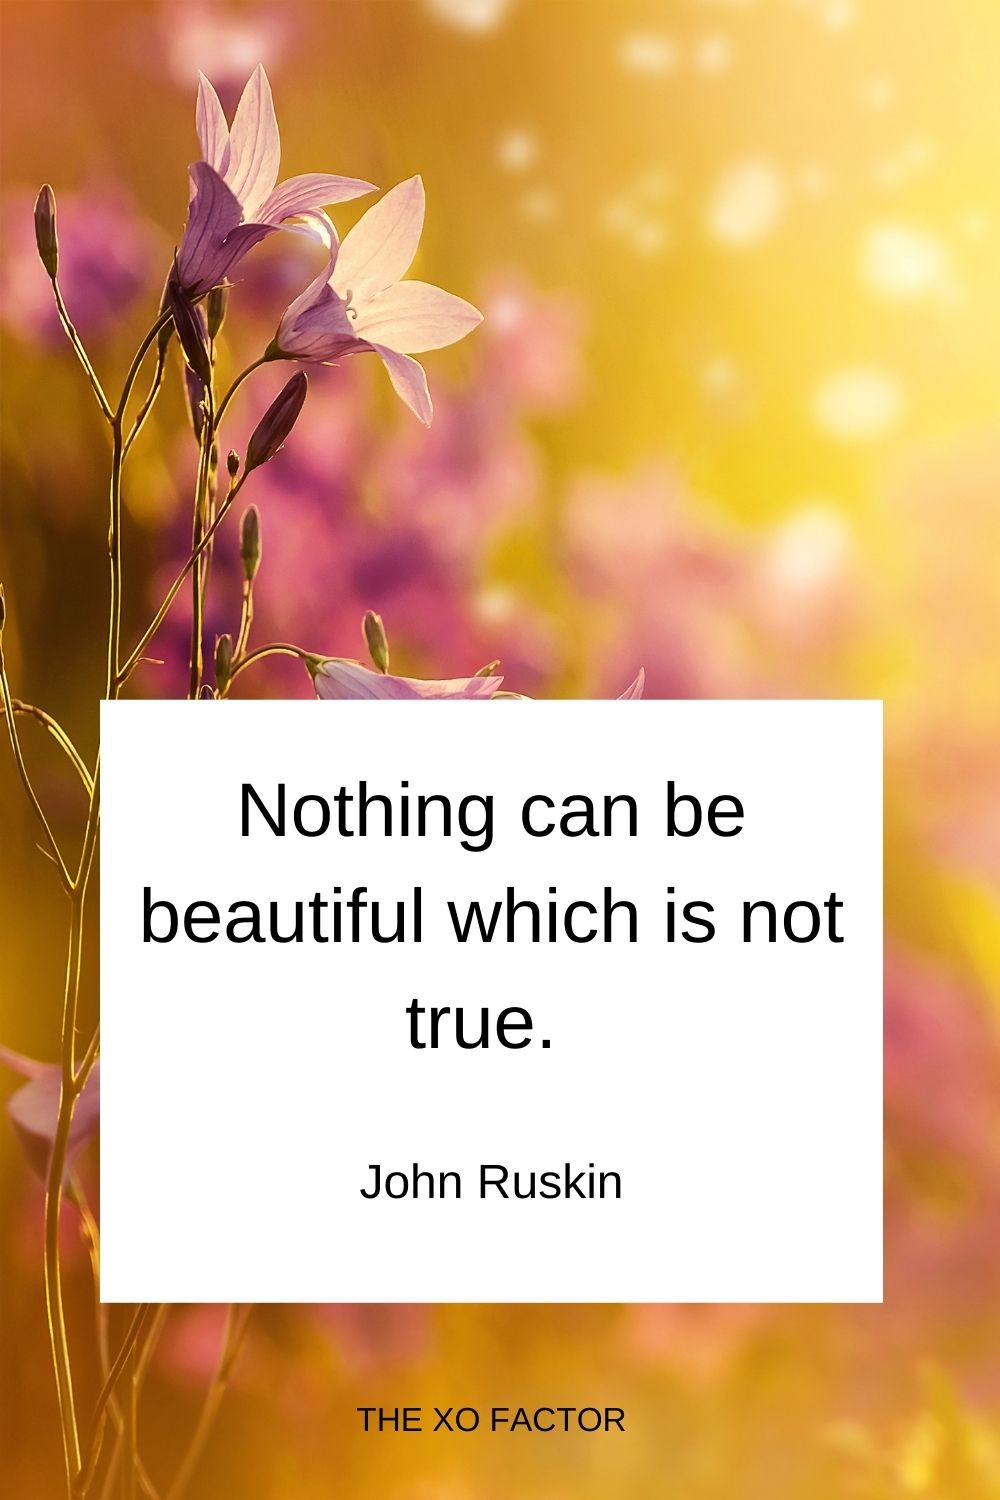 Nothing can be beautiful which is not true.  John Ruskin